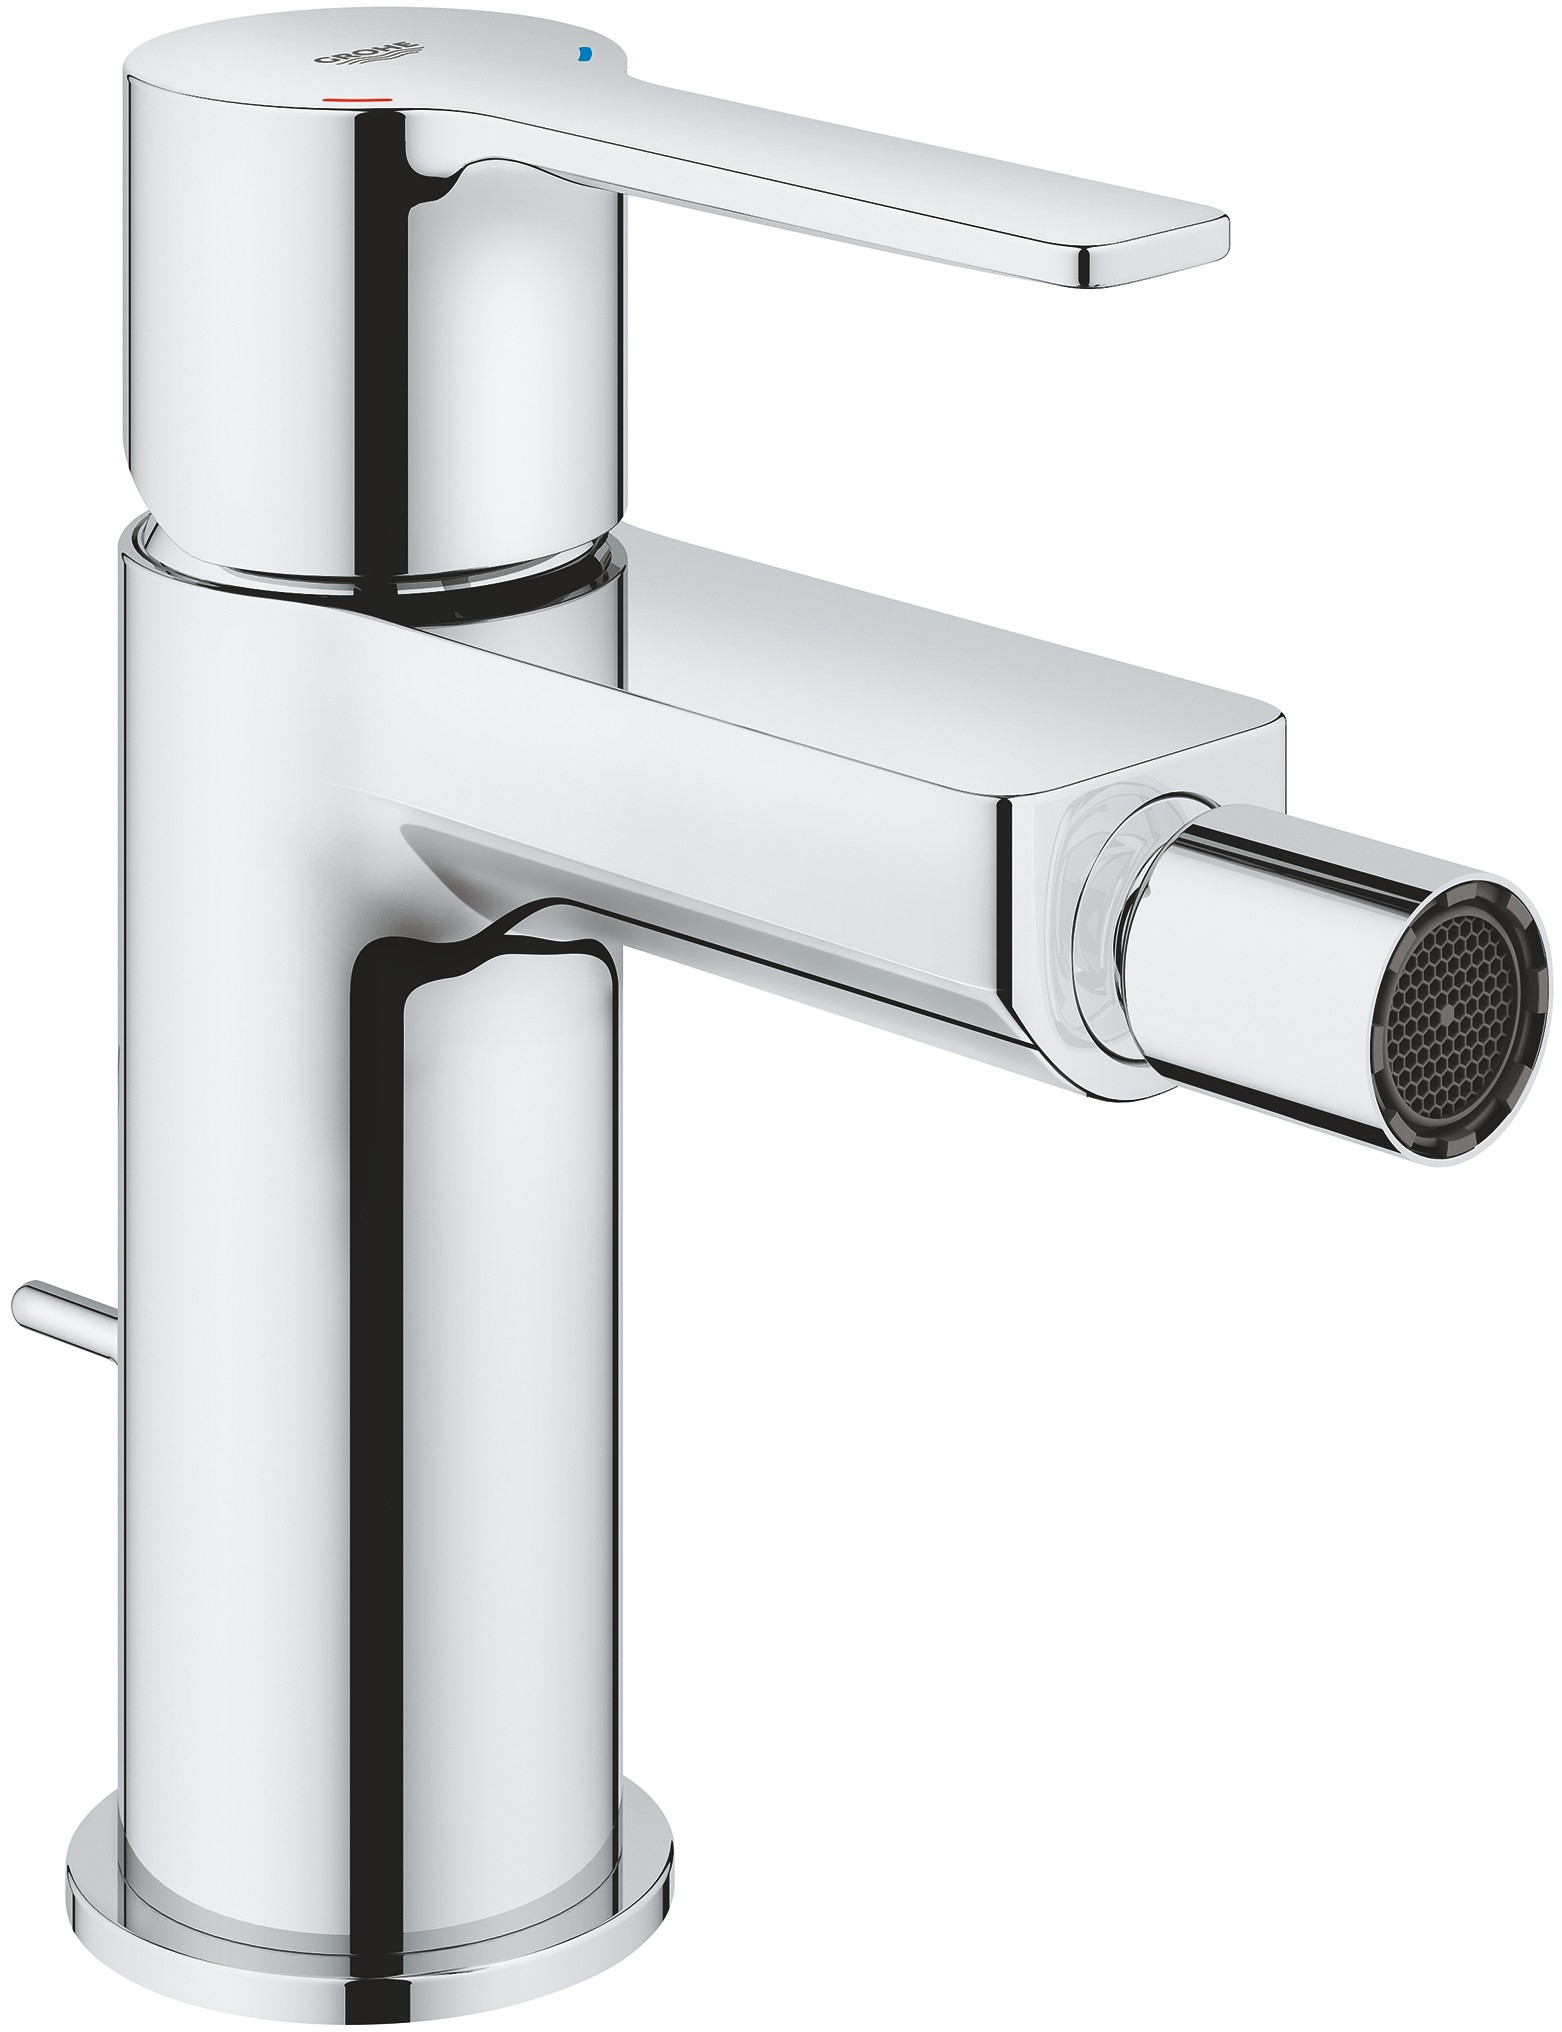 Grohe Lineare 33848001